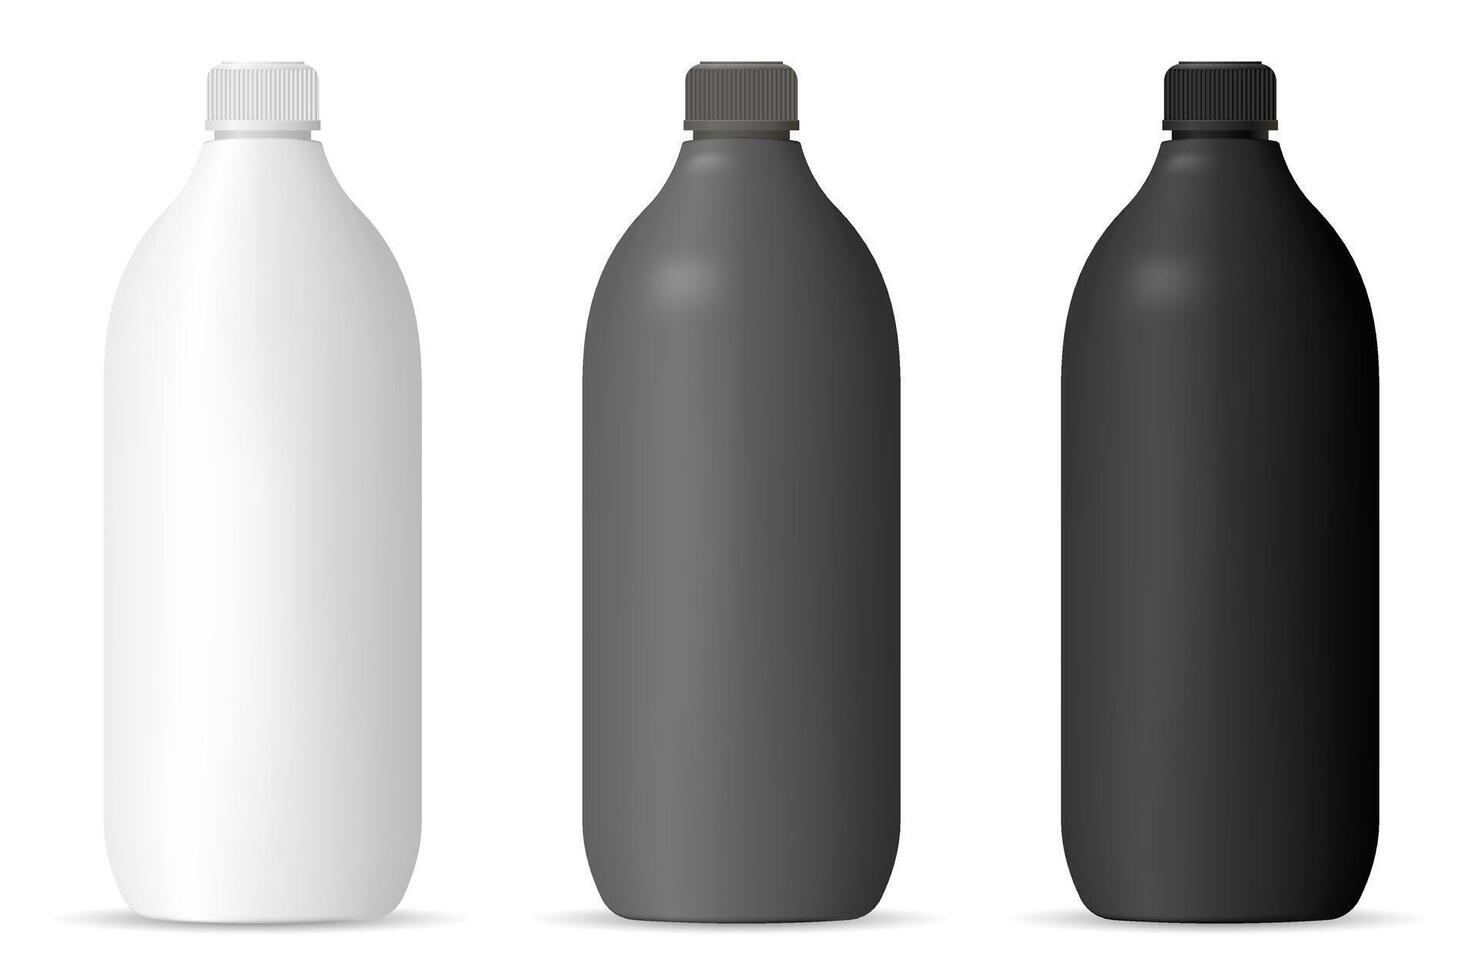 Bottles mockup set for cosmetic or household products. Cylinder Packaging containers in matte black, white or gray color plastic for shampoo, gel, lotion, hair and body products, chemistry. vector